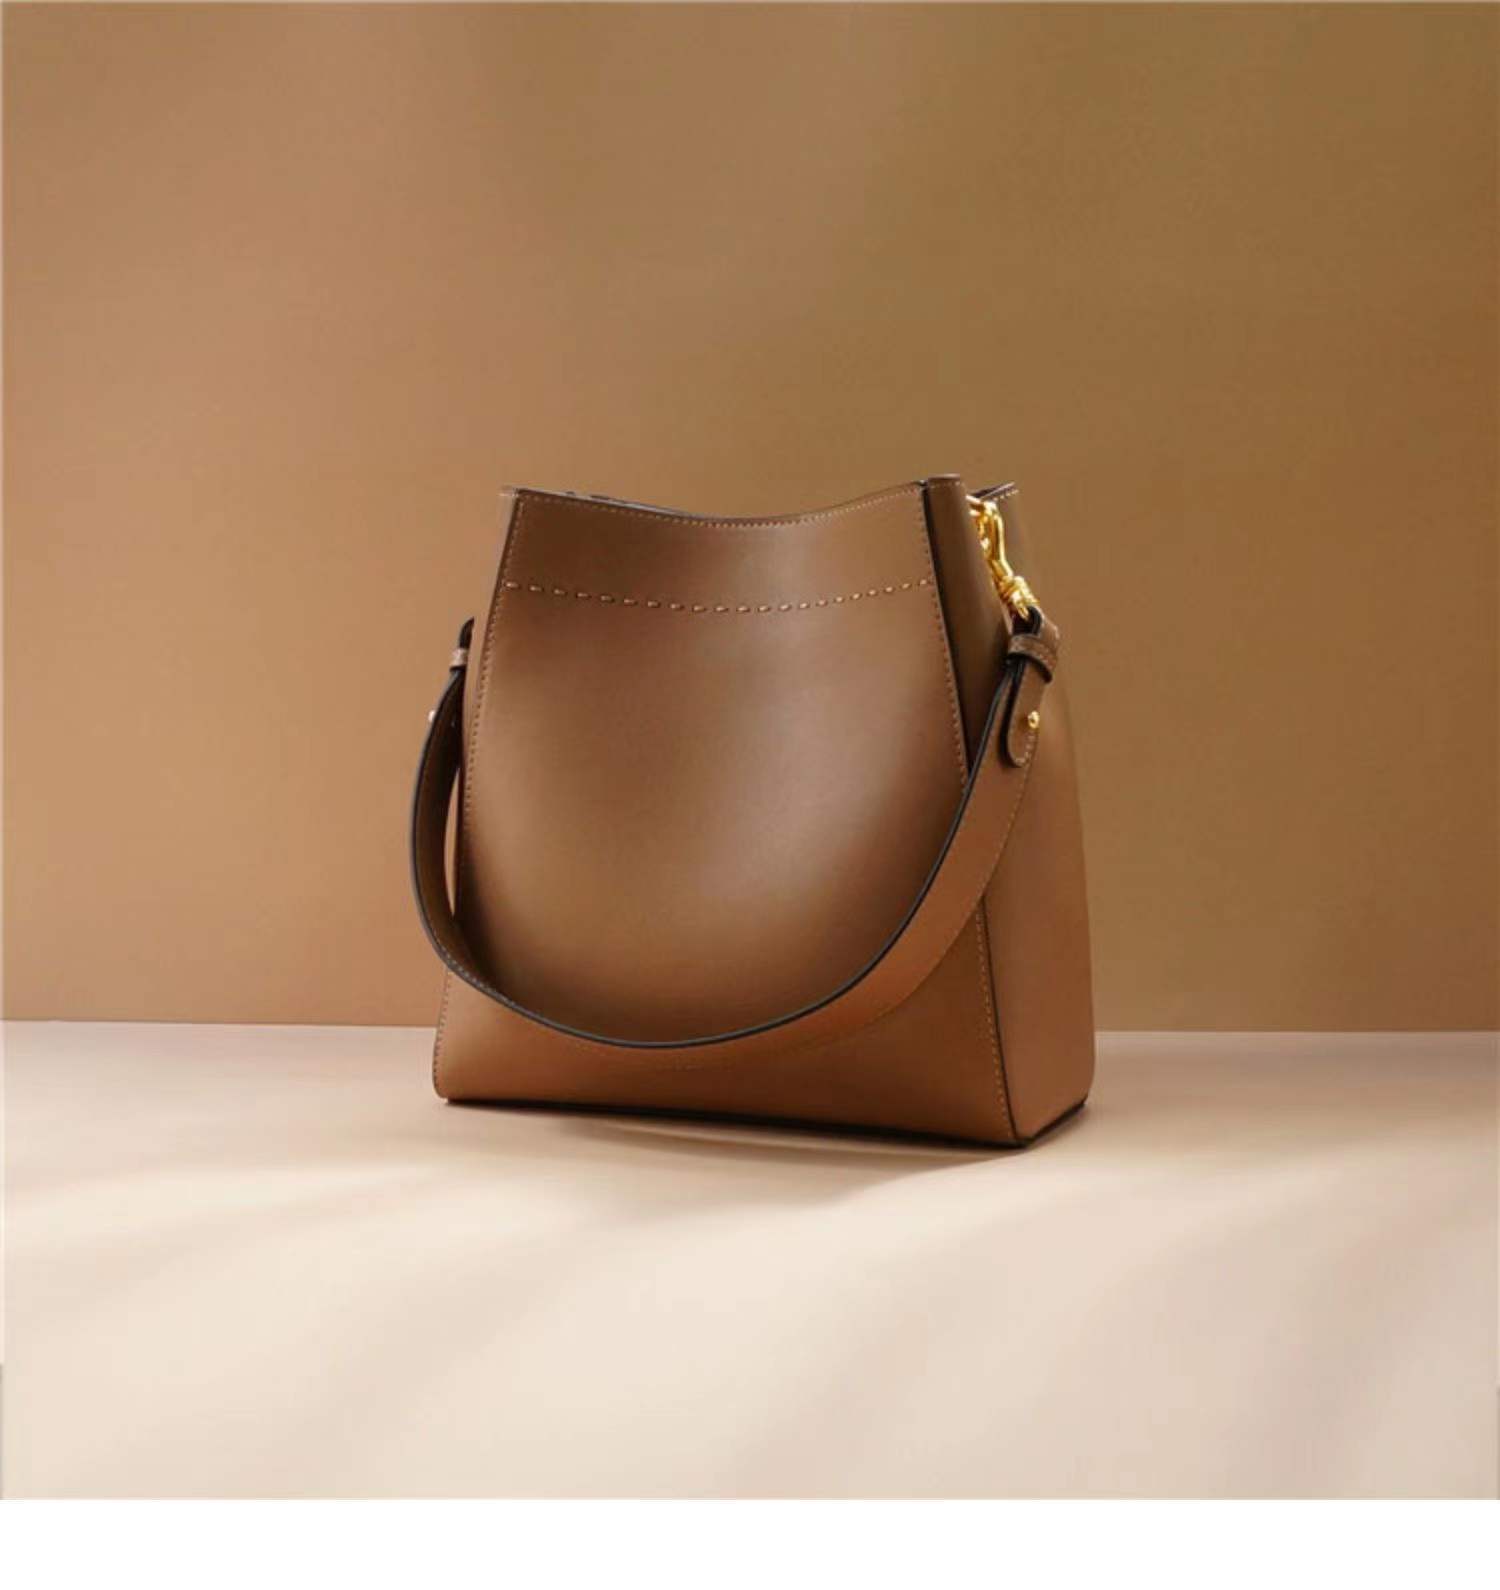 Retro Textured Soft Leather Bag Women's Foreign Trade 2022 New Fashion Shoulder Bag Large Capacity Tote Women's Bag Wholesale